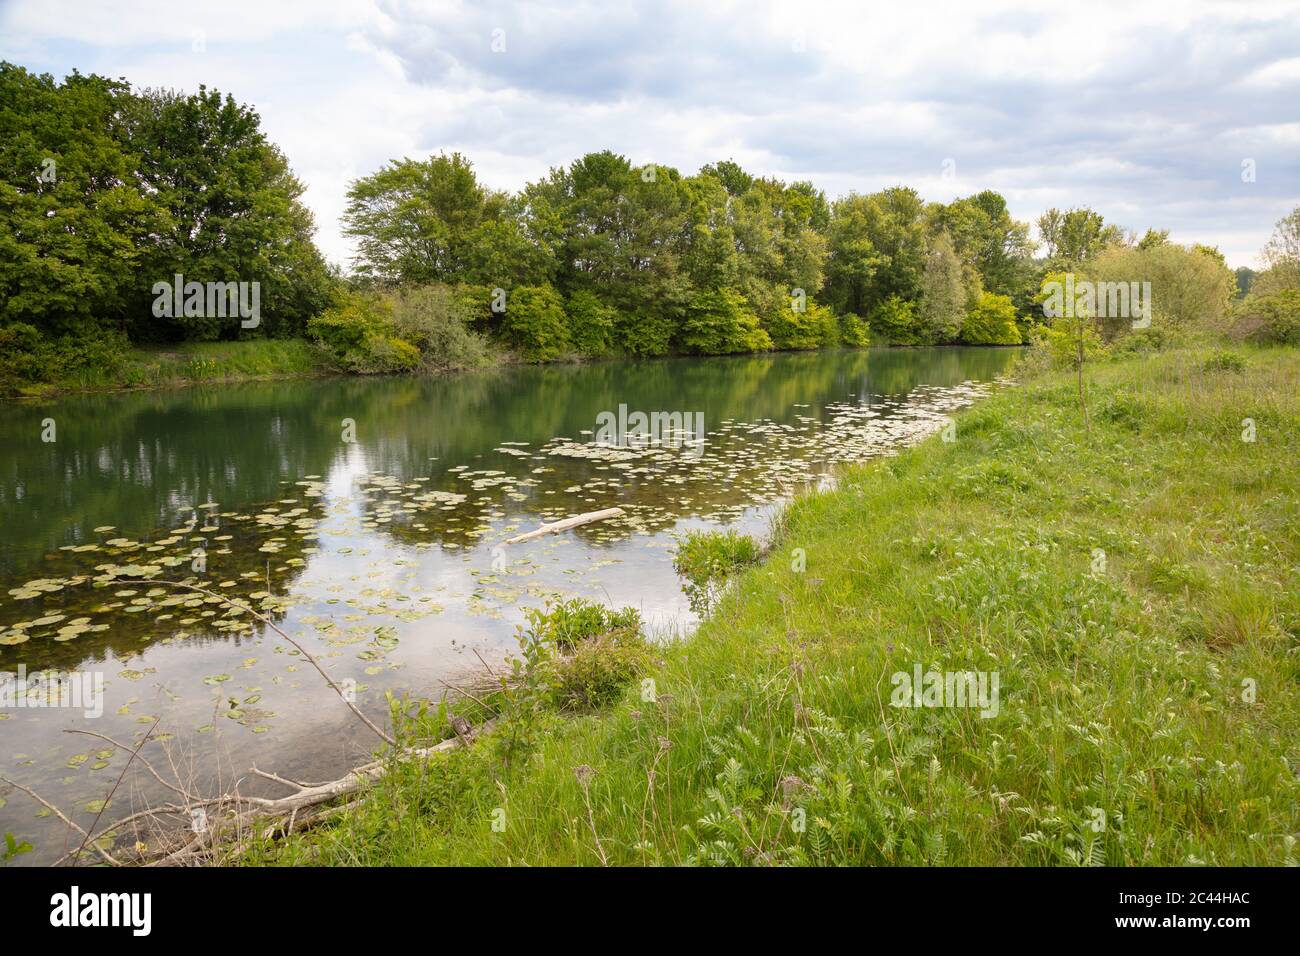 Germany, North Rhine-Westphalia, Werne, Bank of Lippe river in spring Stock Photo